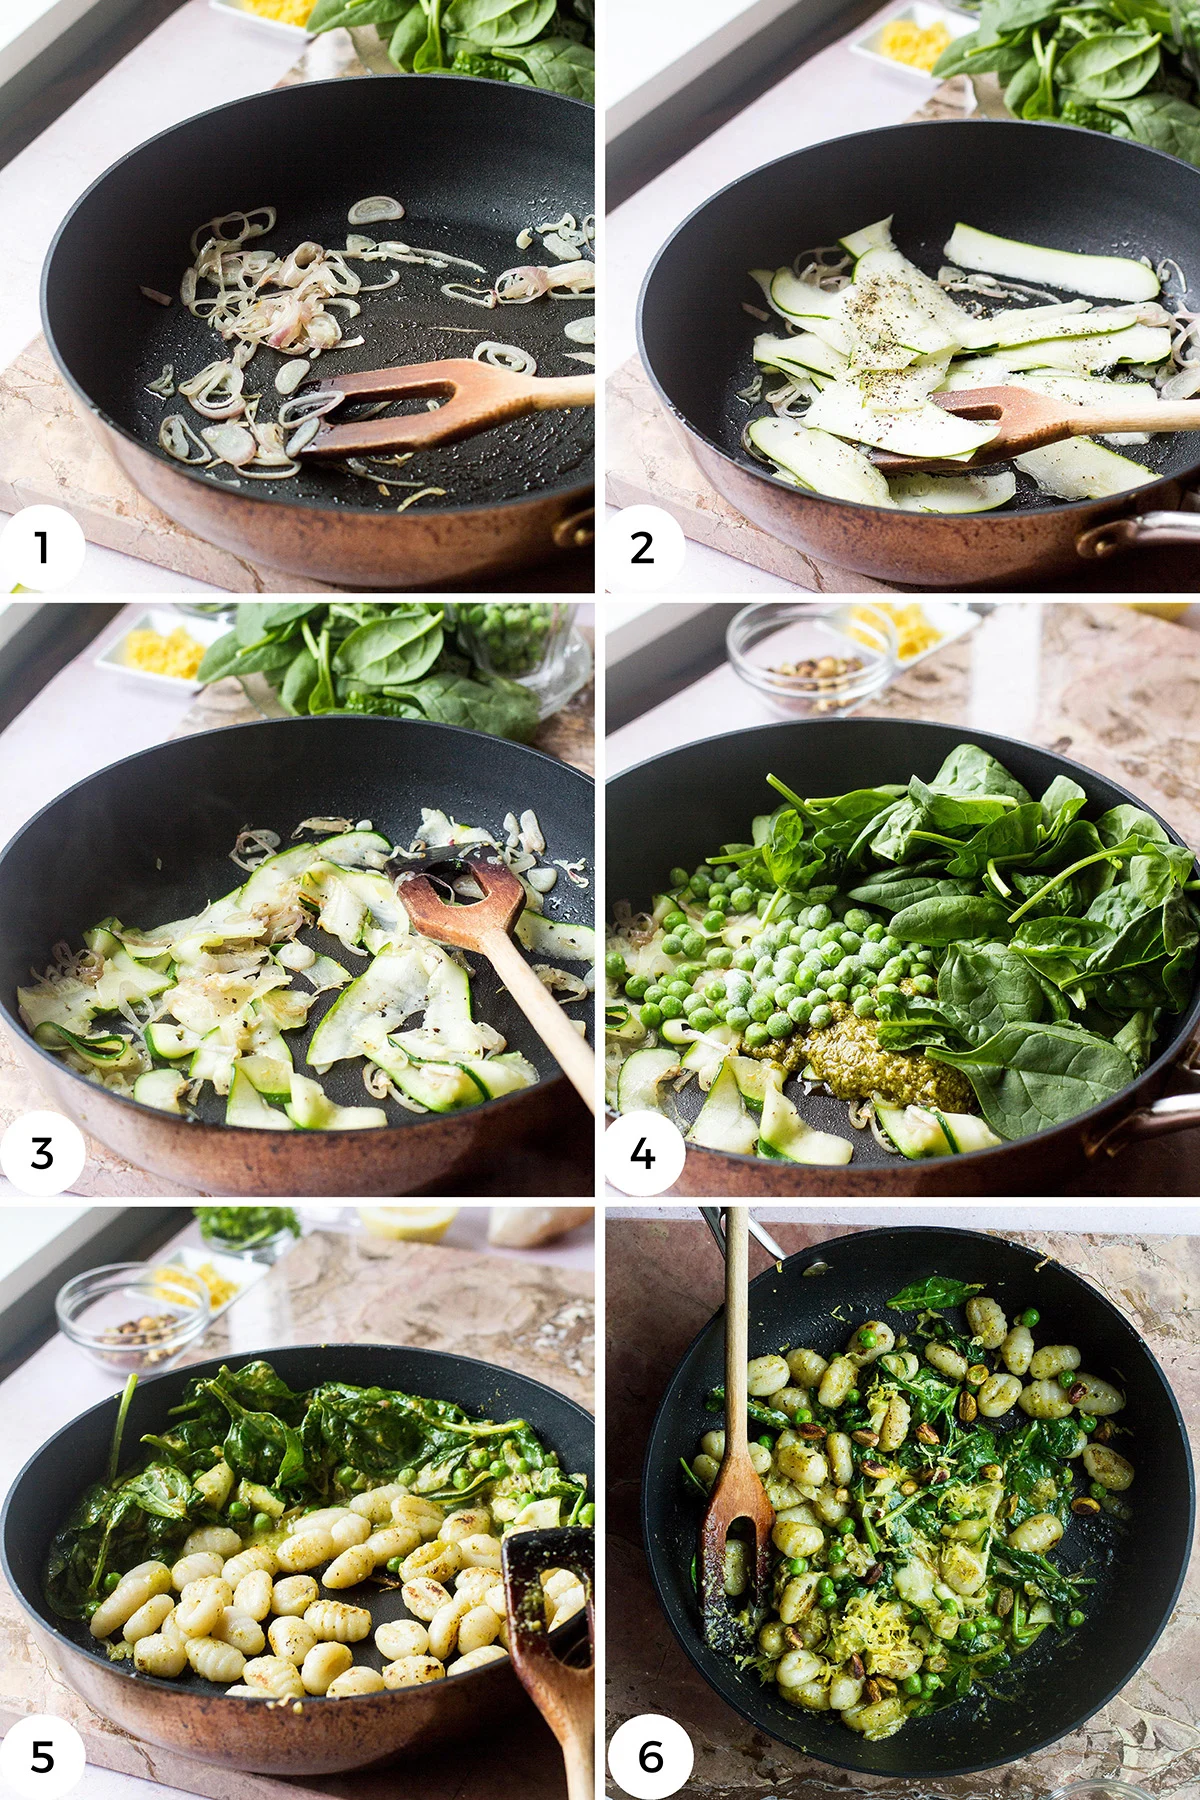 Steps to make the dish.